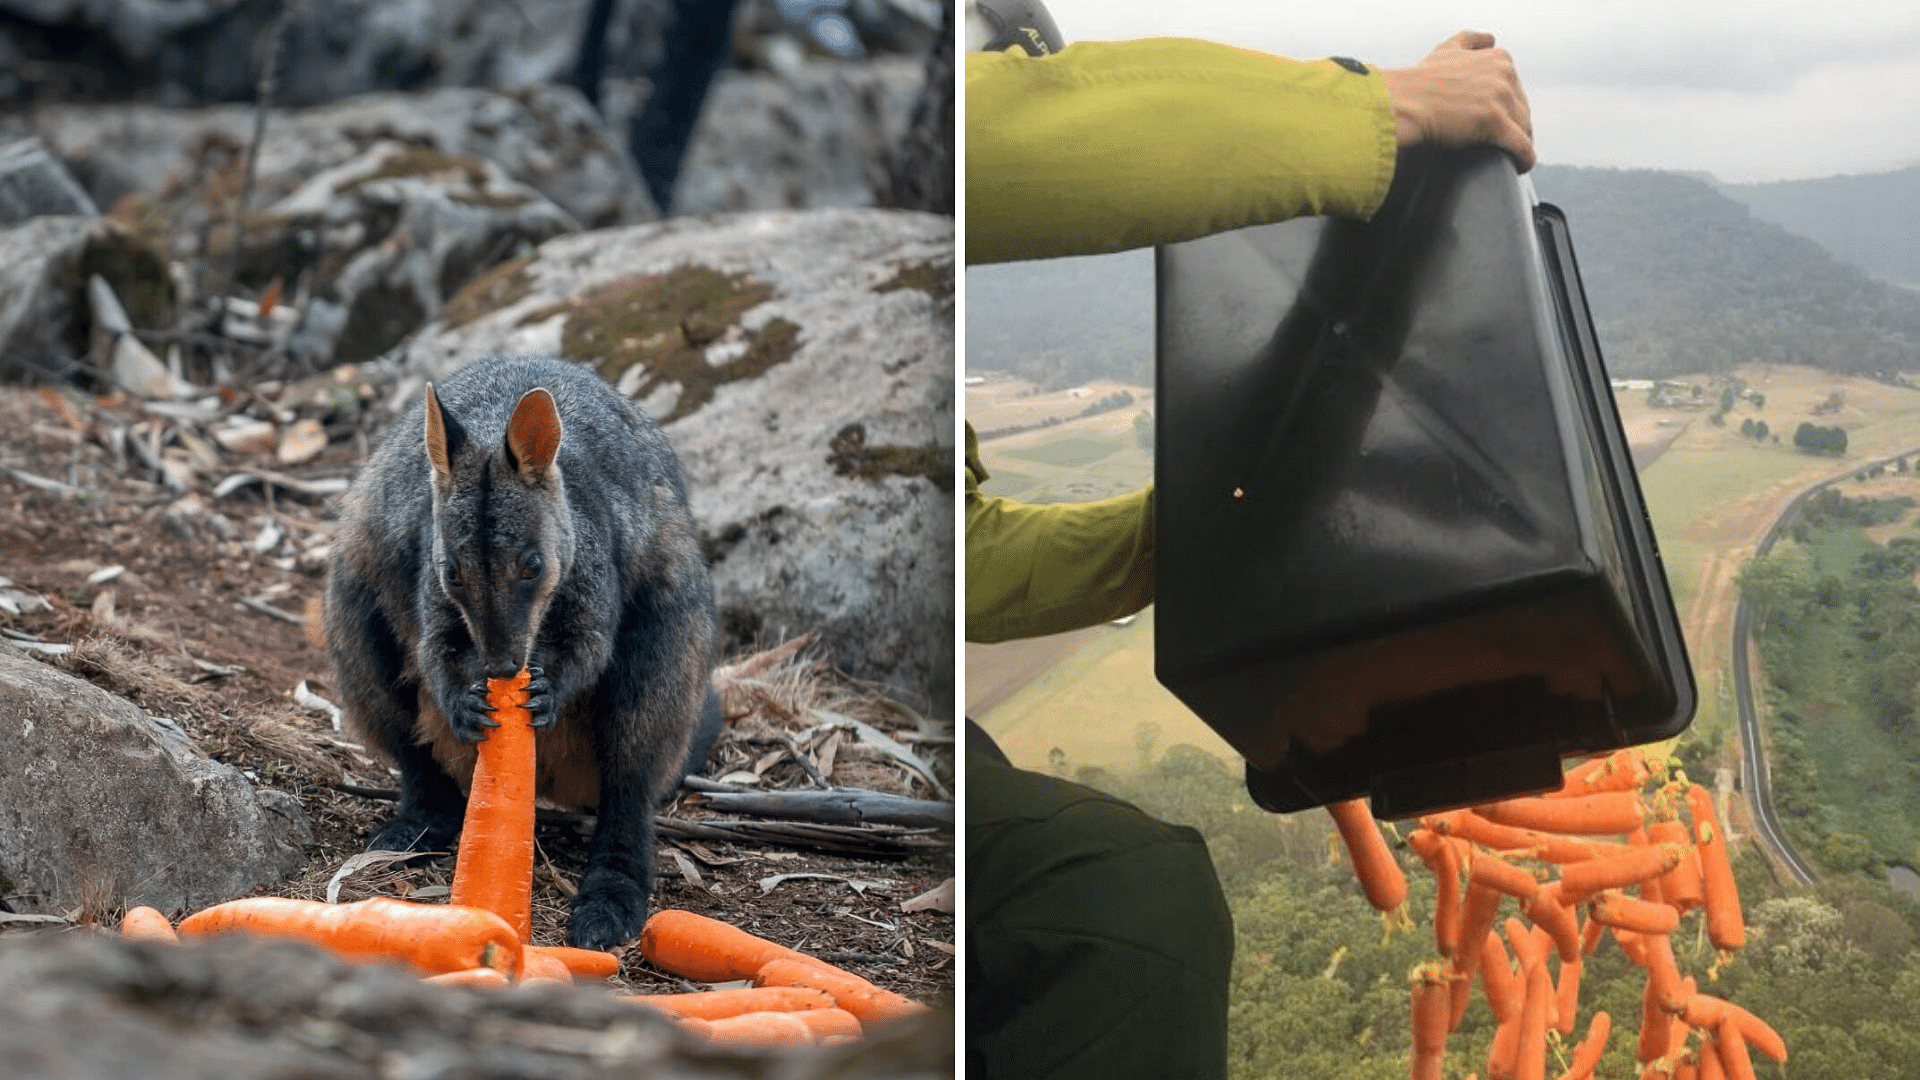 Under the Rock Wallaby initiative, animals are being dropped vegetables from the helicopters amid Australian wildfires.